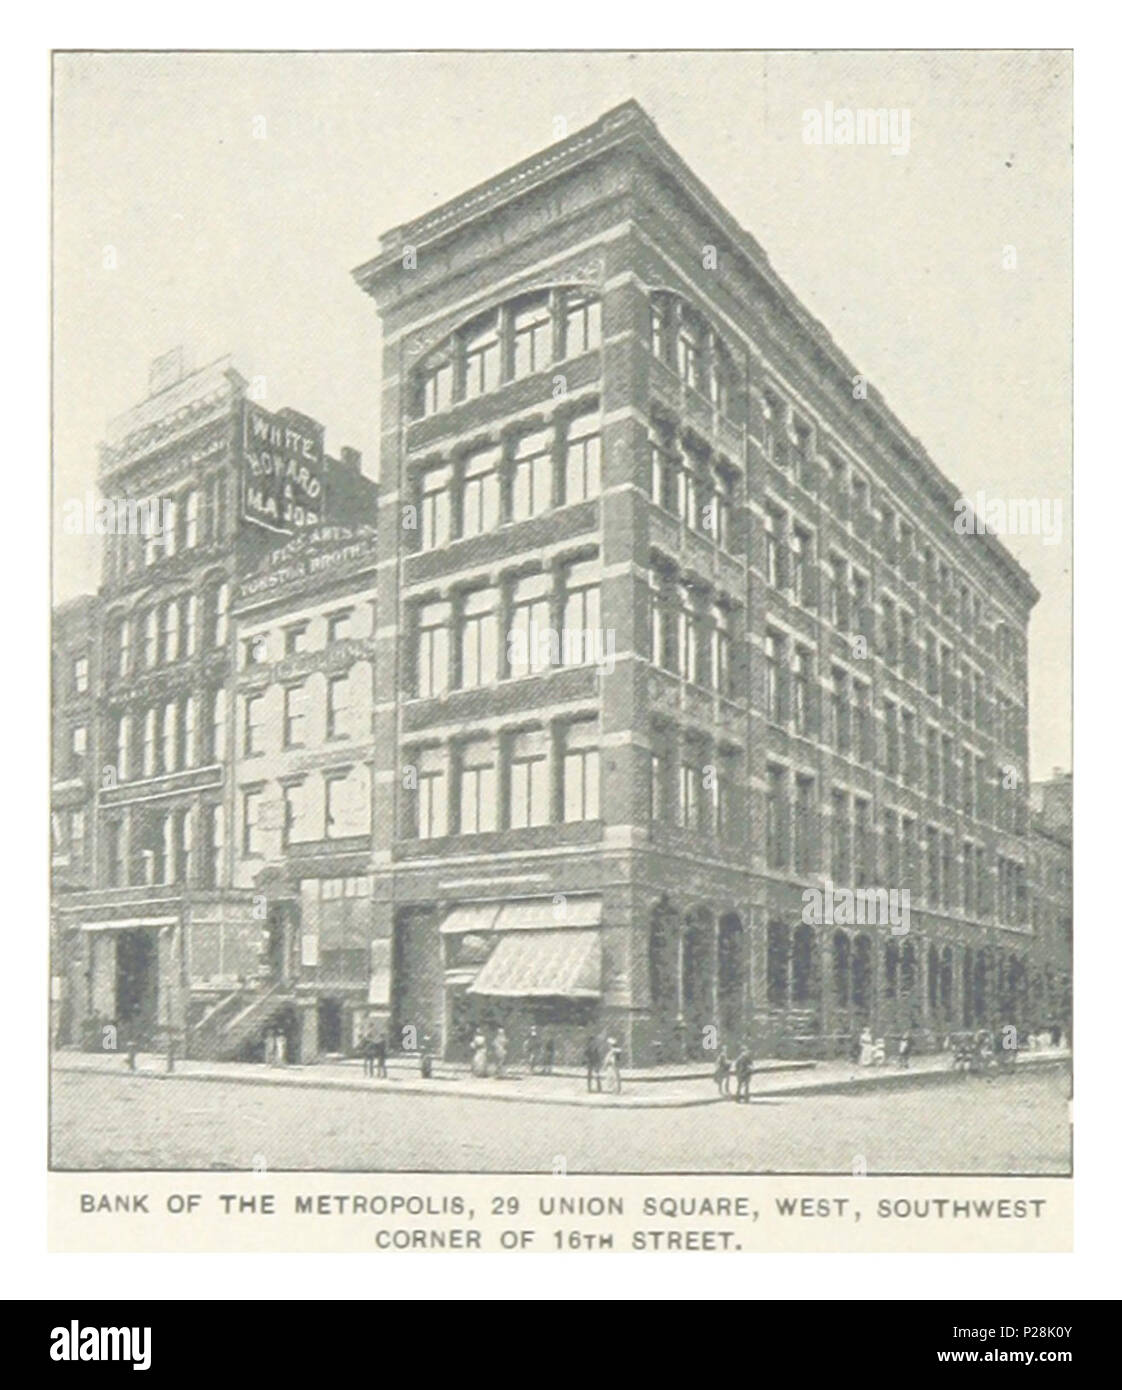 (King1893NYC) pg746 BANK OF THE METROPOLIS, 29 UNION SQUARE, WEST, SOUTHWEST CORNER OF 16TH STREET. Stock Photo